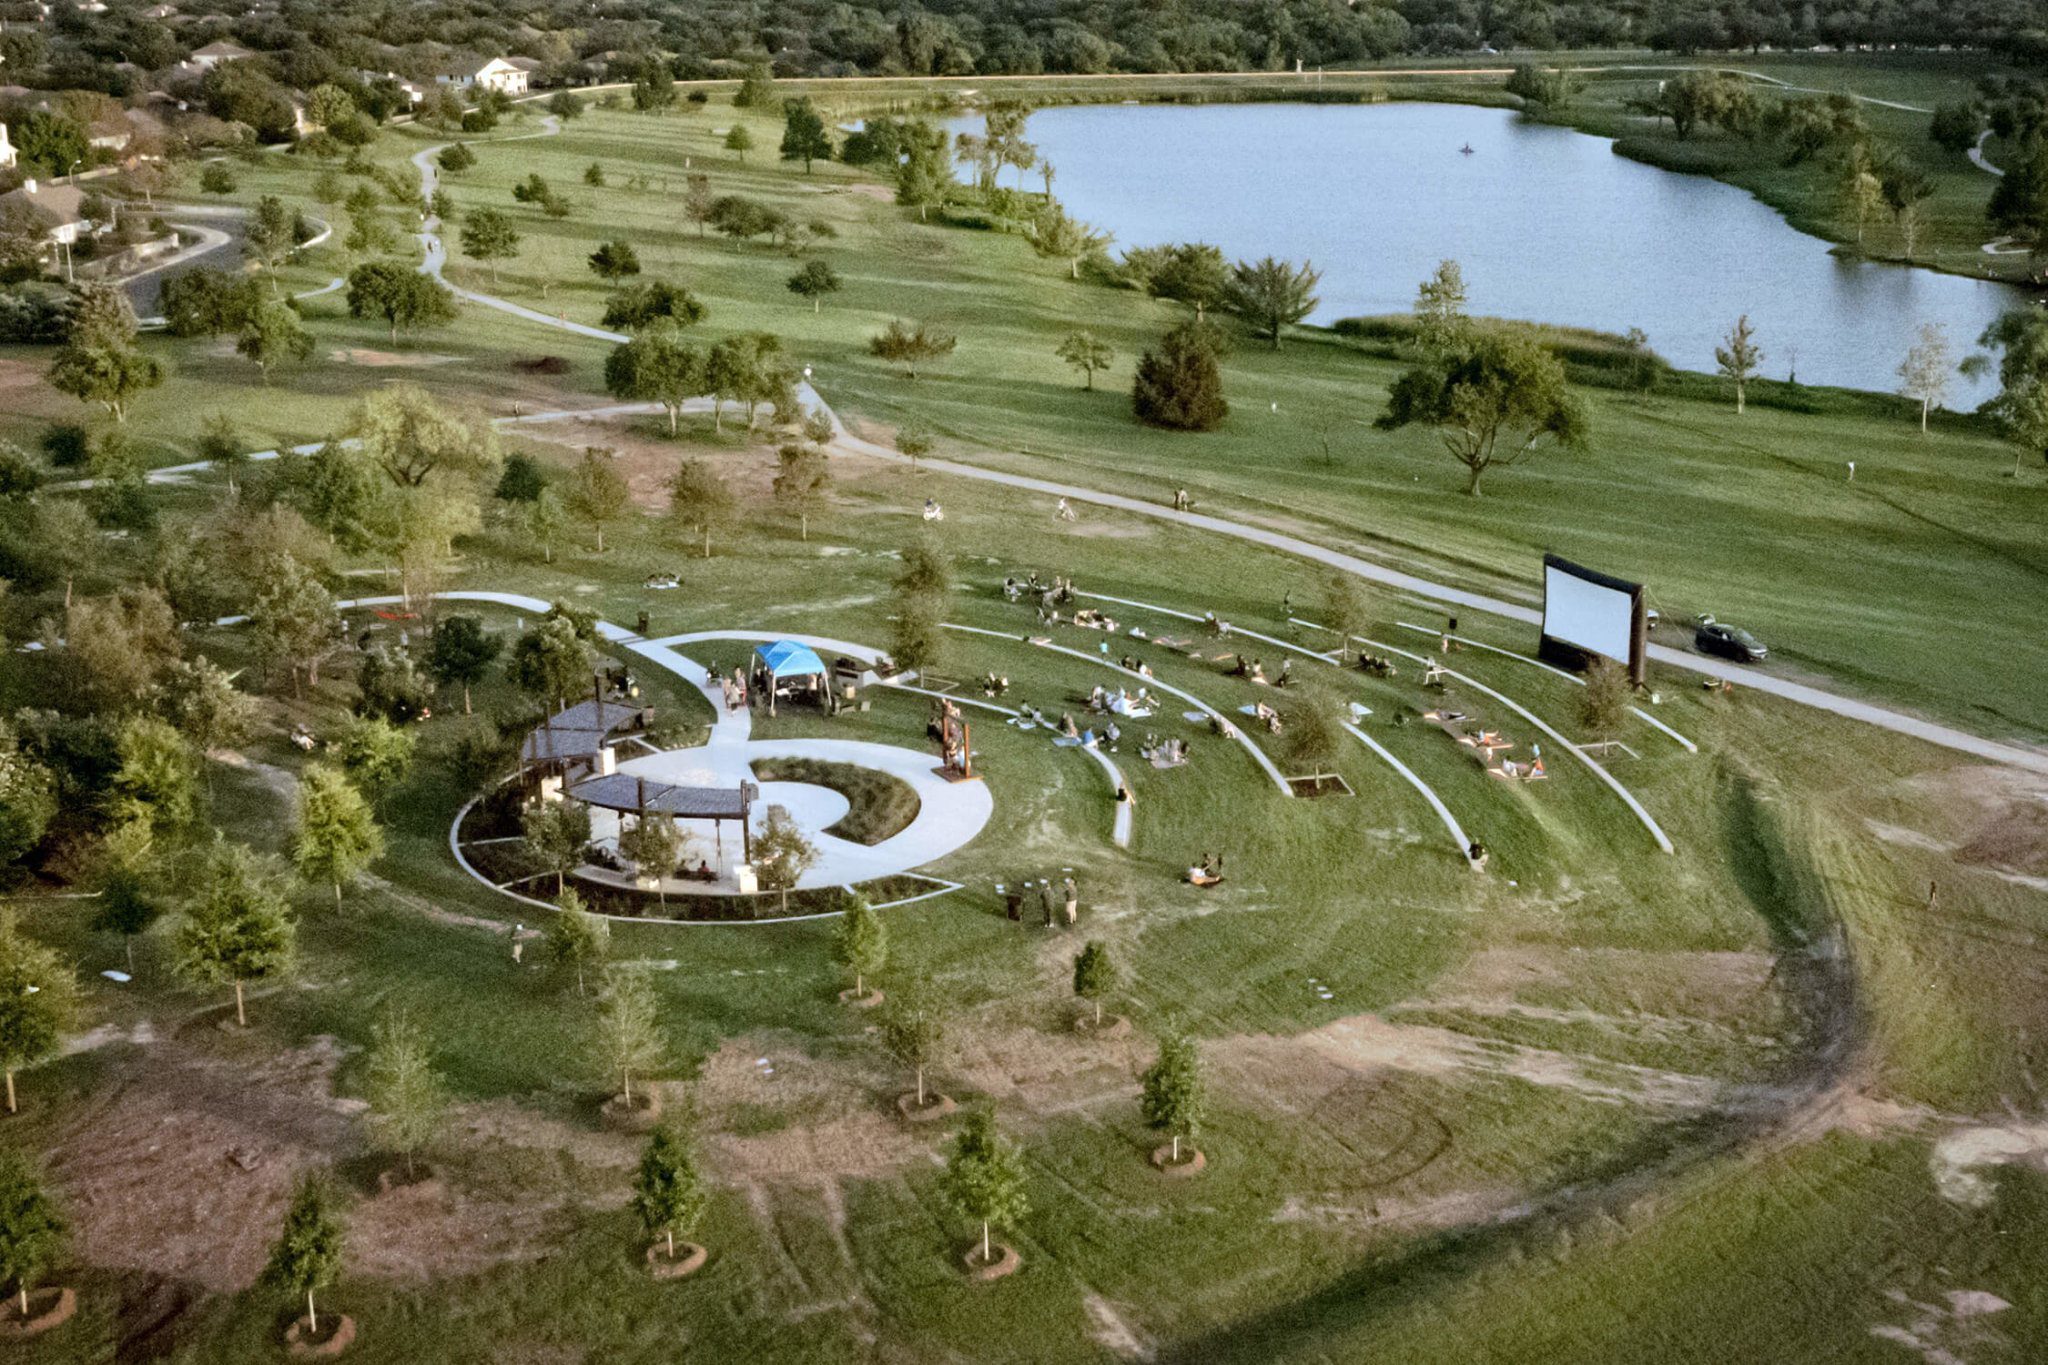 New feature opens in Old Settlers Park City of Round Rock